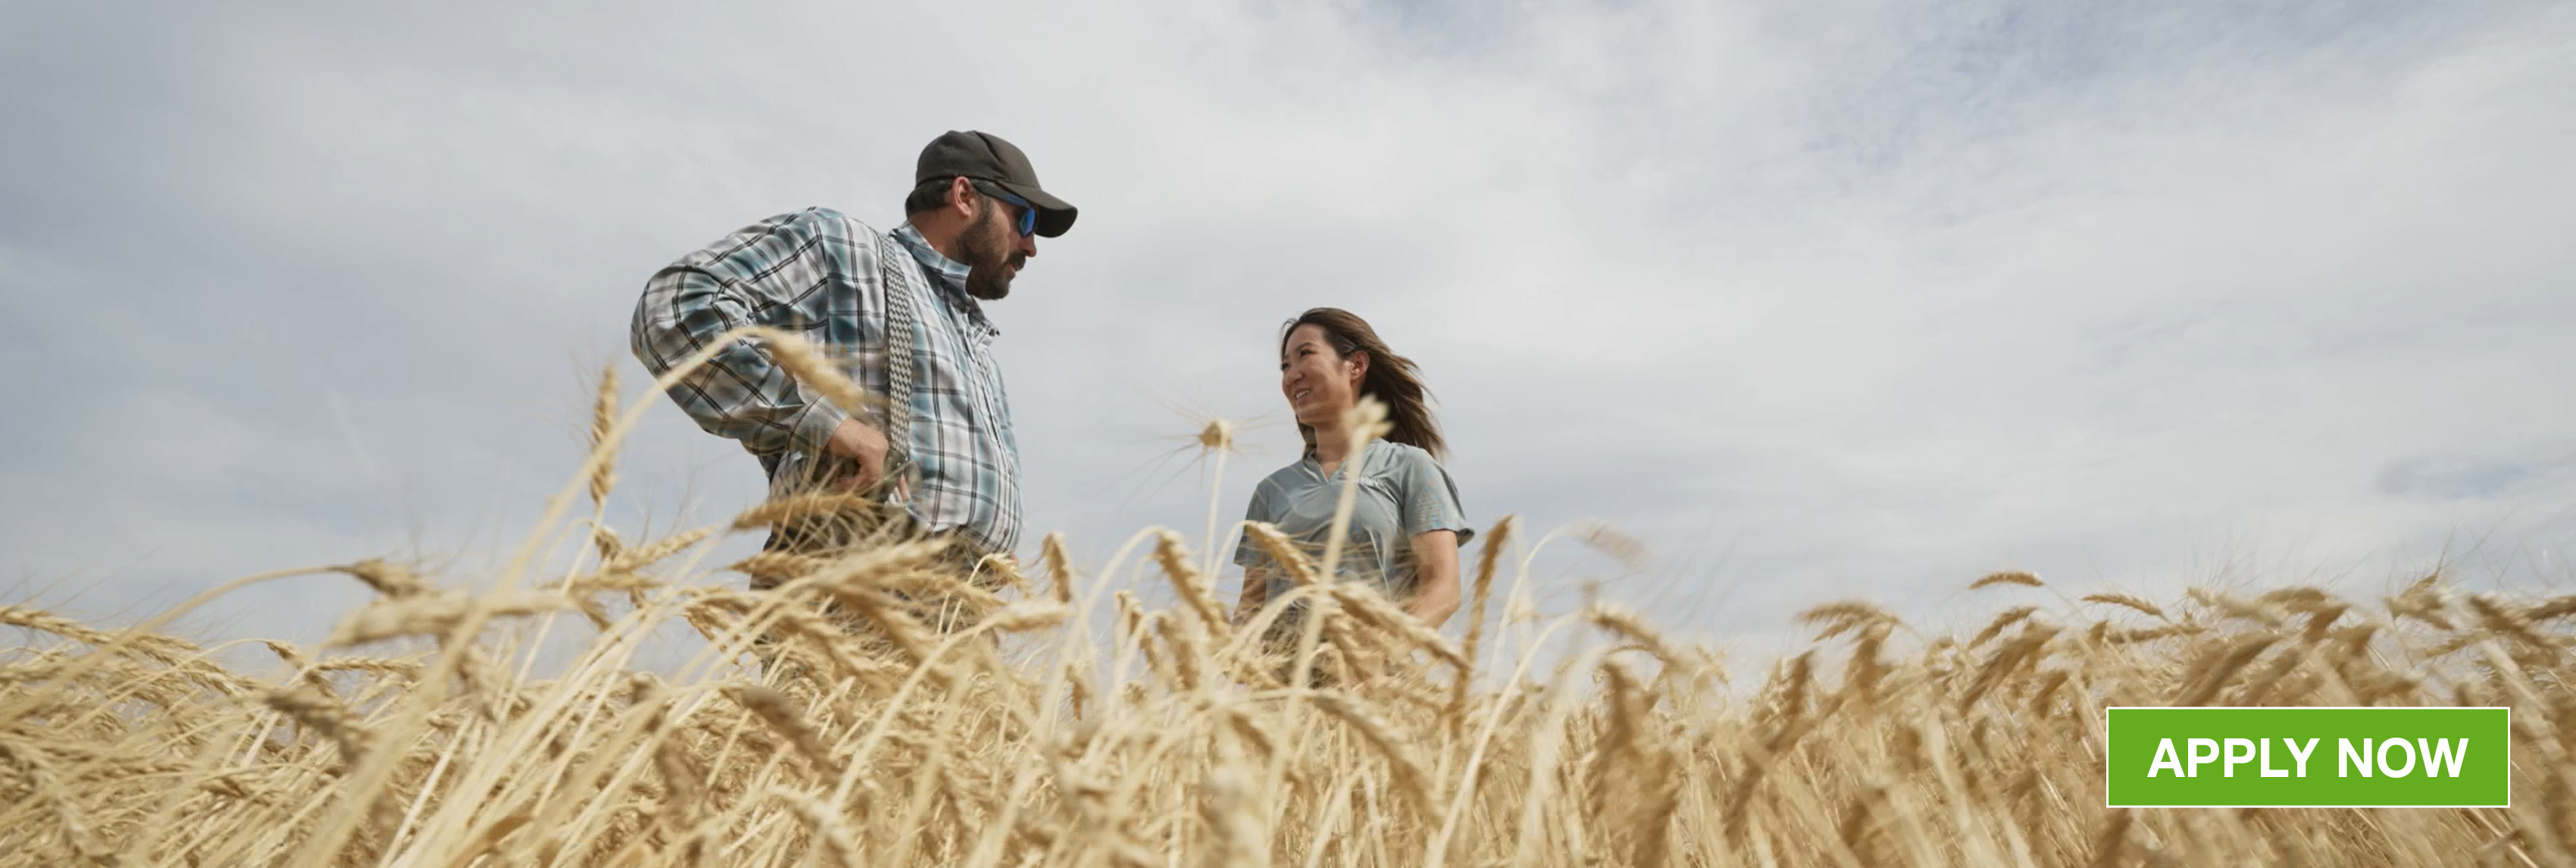 Two people talking in a cereal crop field